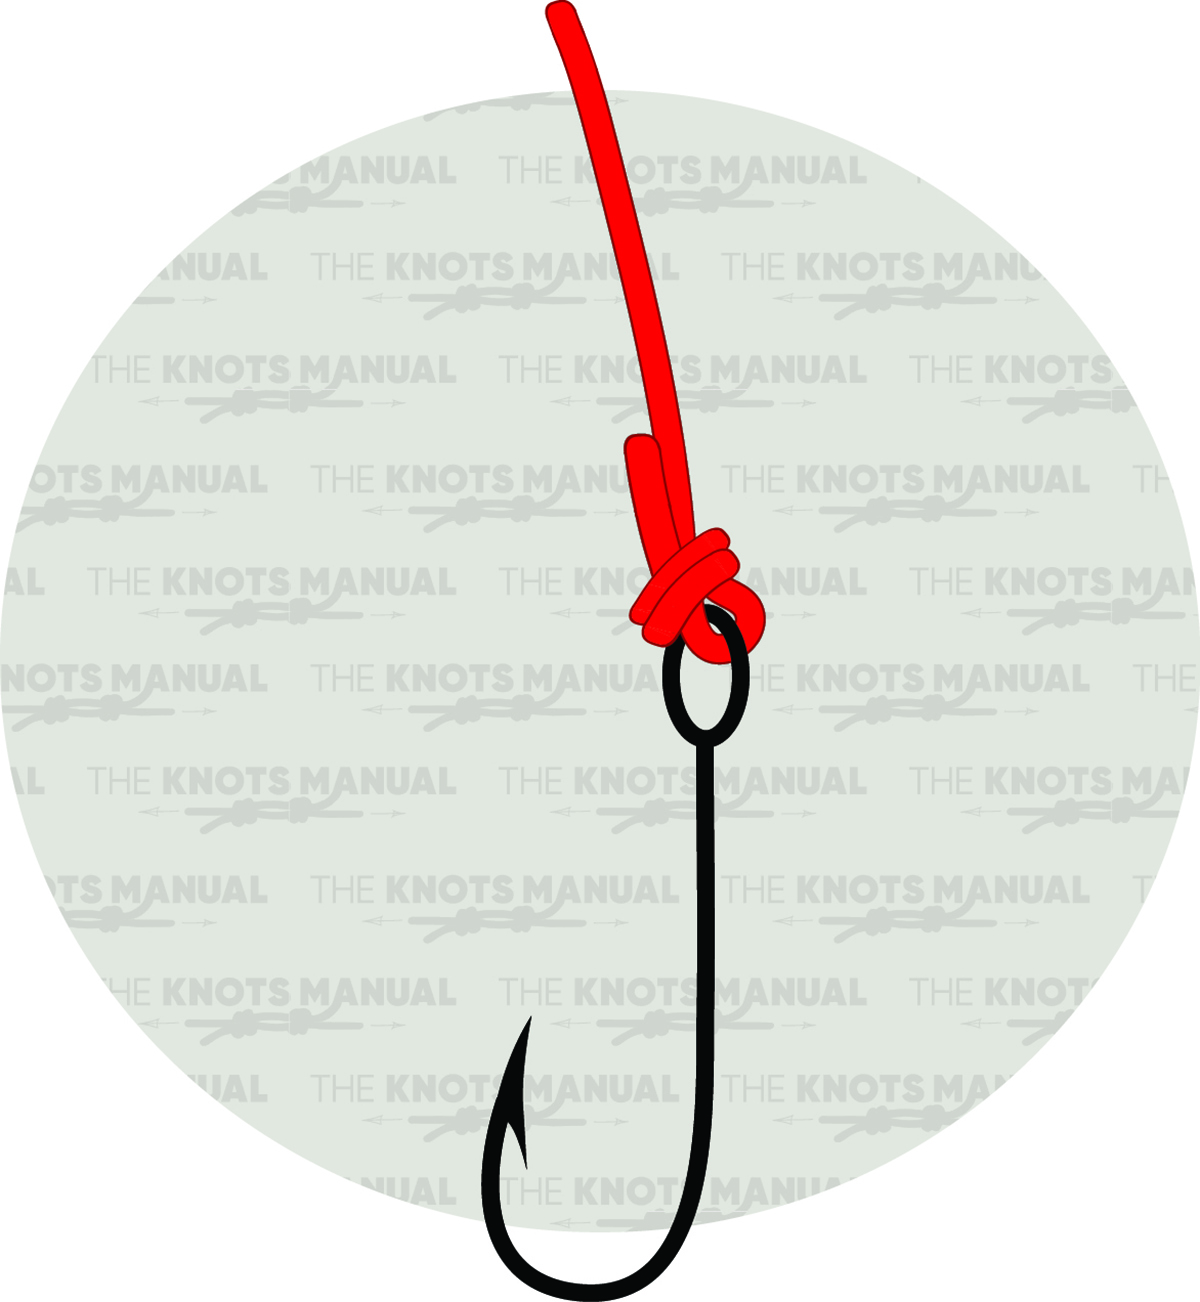 How to Tie the Palomar Knot (Illustrated Guide)